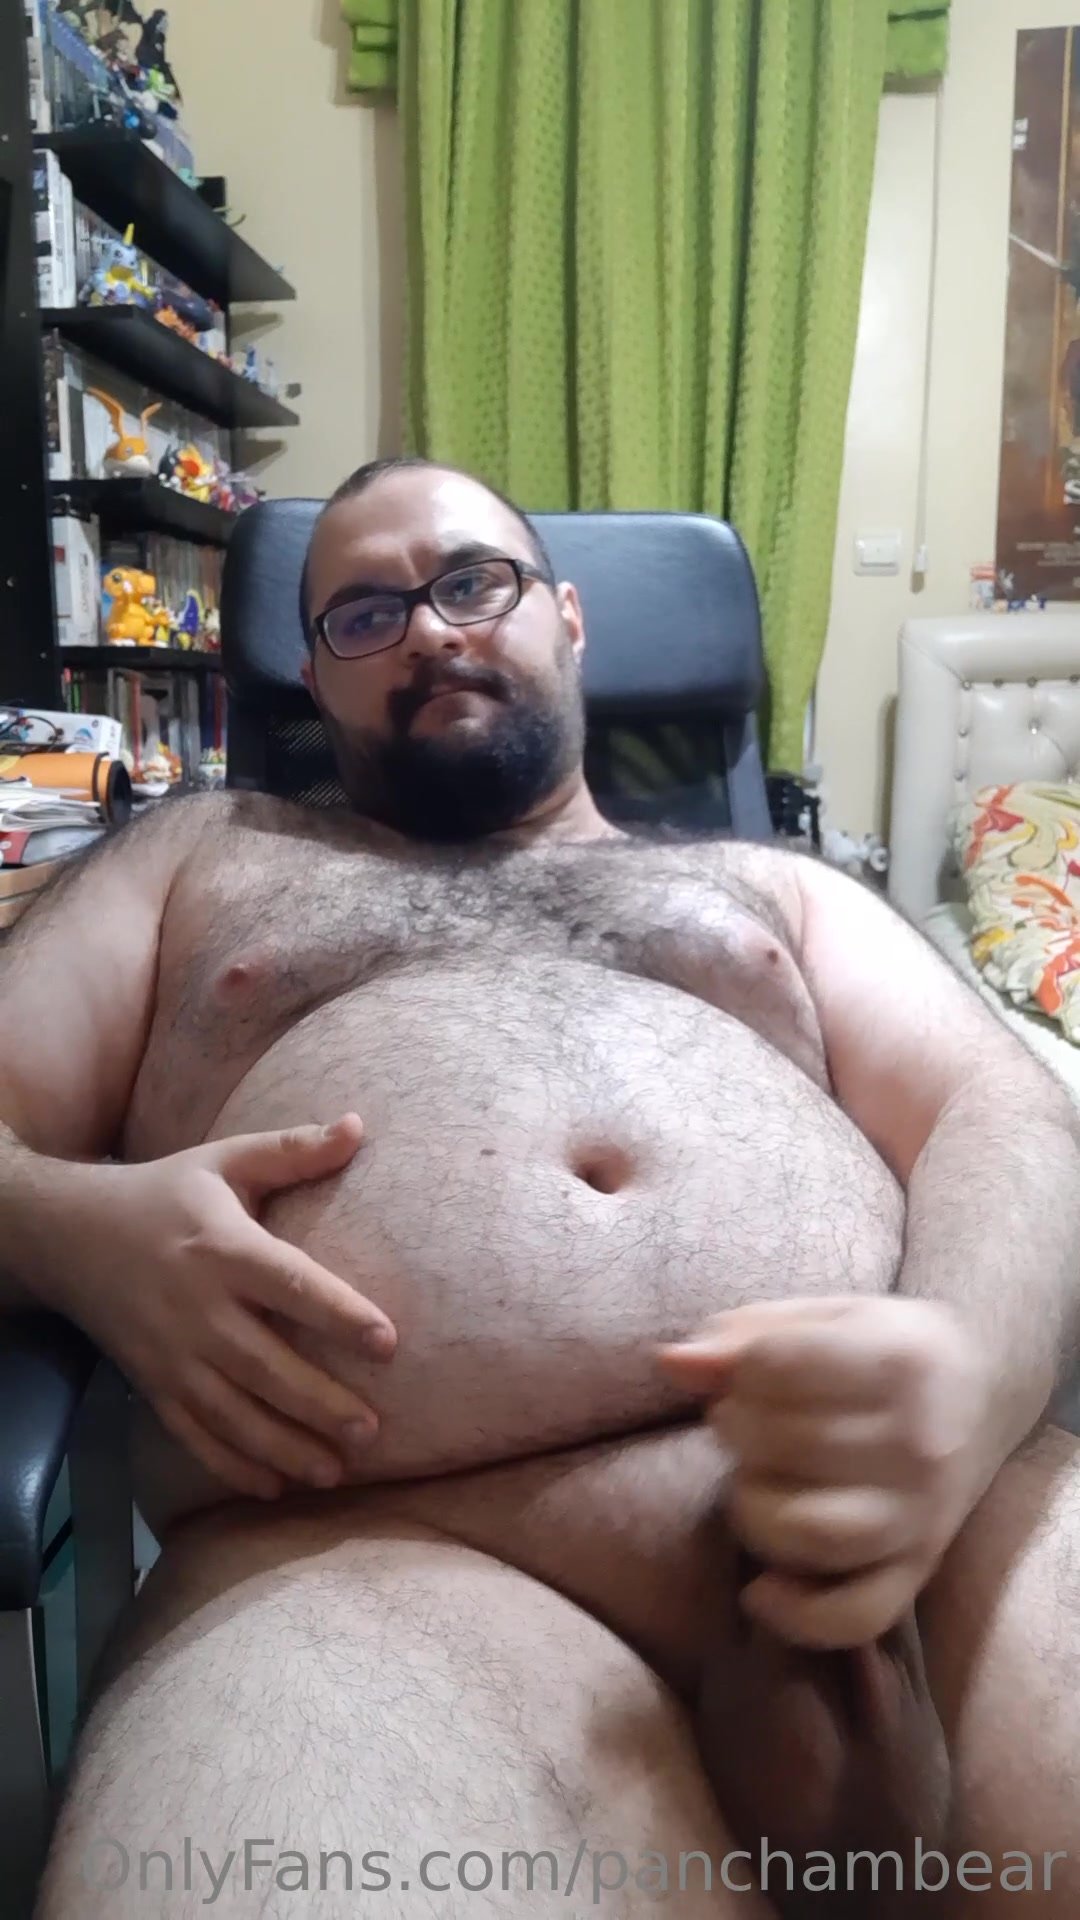 Turkish chubby bear cumming and eating his own cum